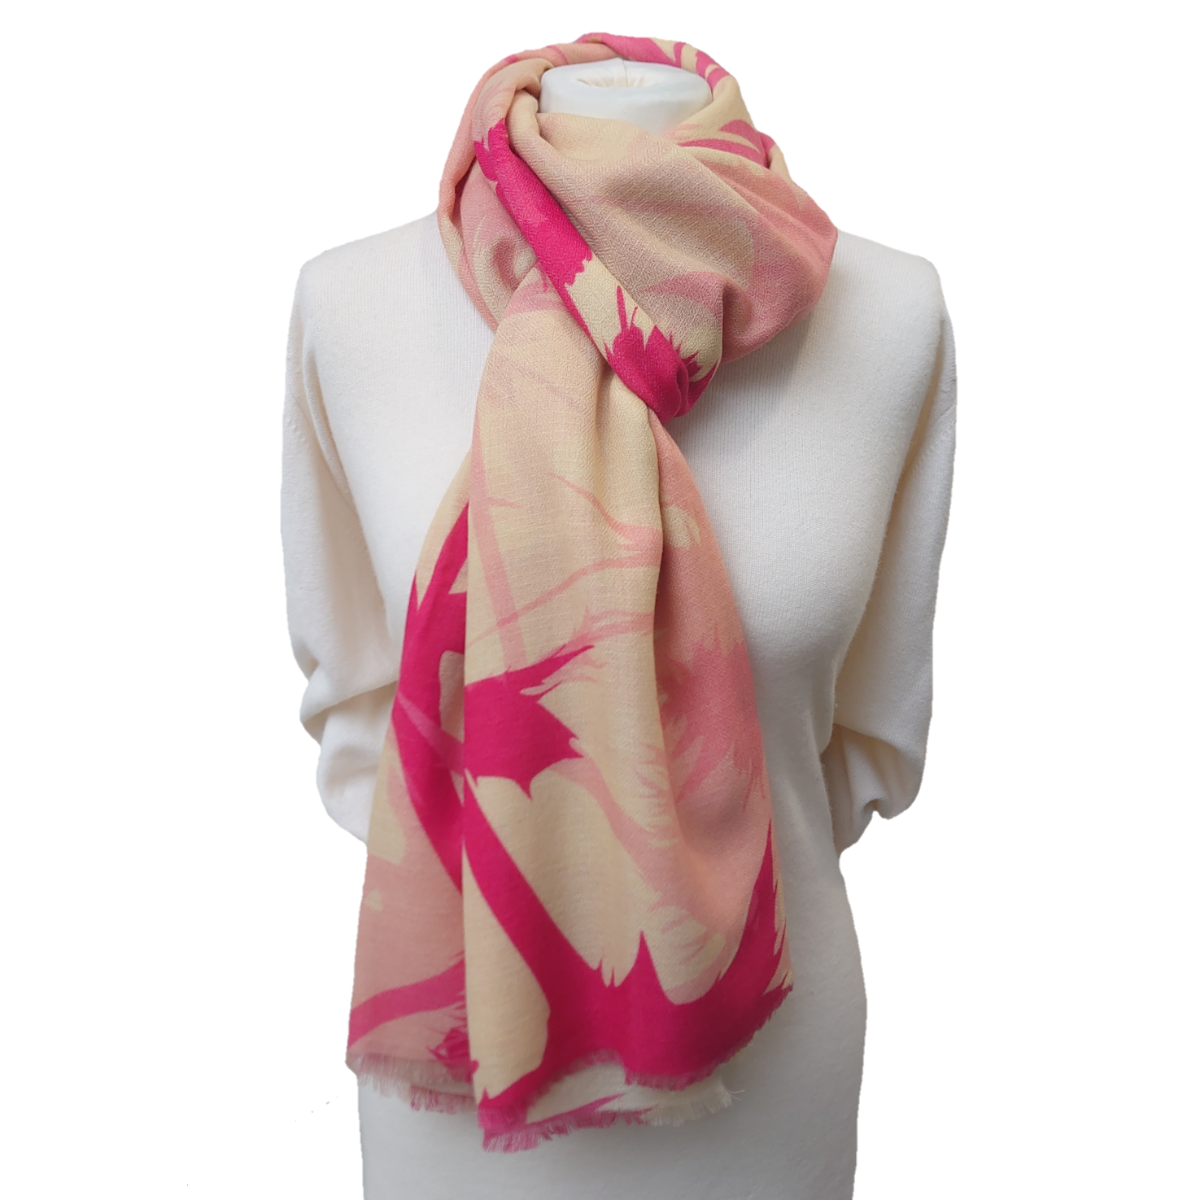 Ltd Edition 100% Pure Pashmina Cashmere Shawl - Large Scarf - Peach And Pink Print